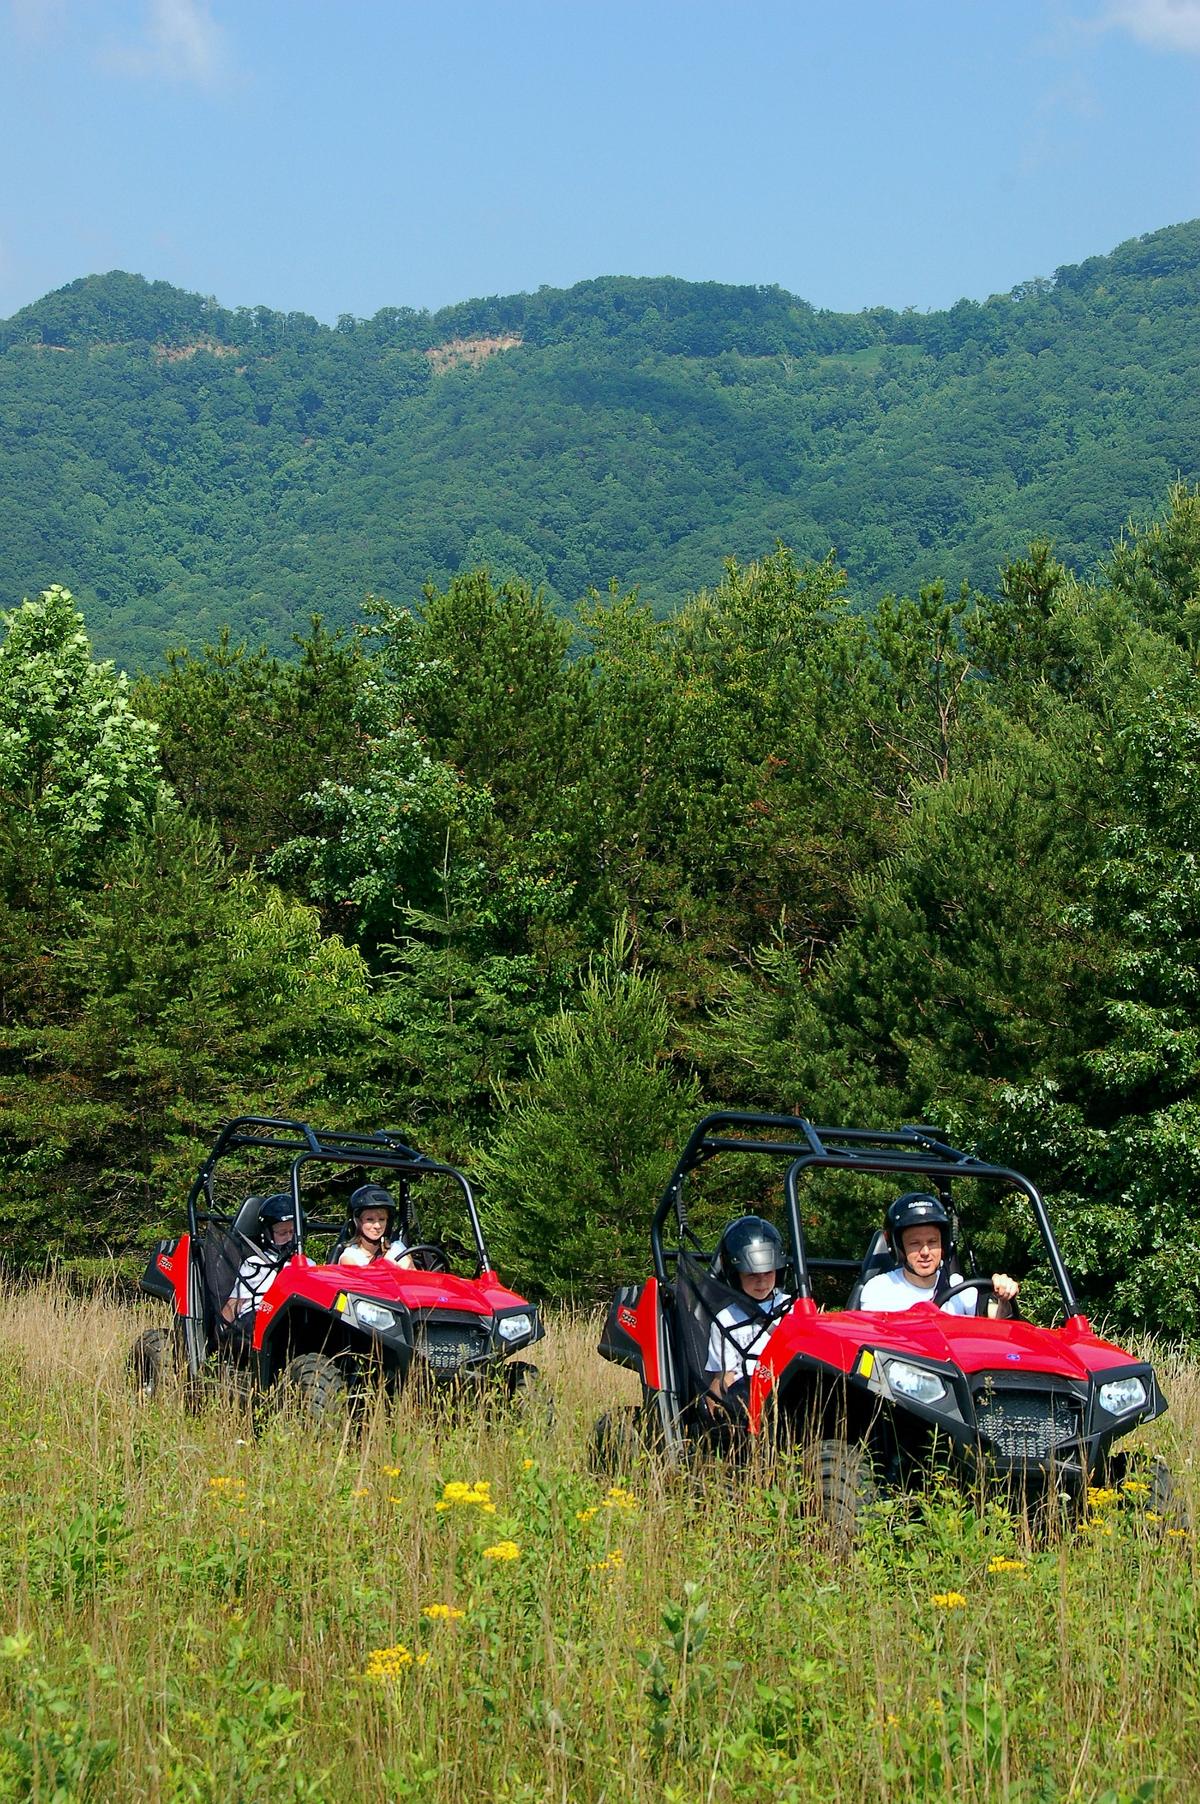 Guests can opt to take a recreational terrain vehicle out for a guided spin; some trails are created especially for off-roading. (Courtesy of Primland)